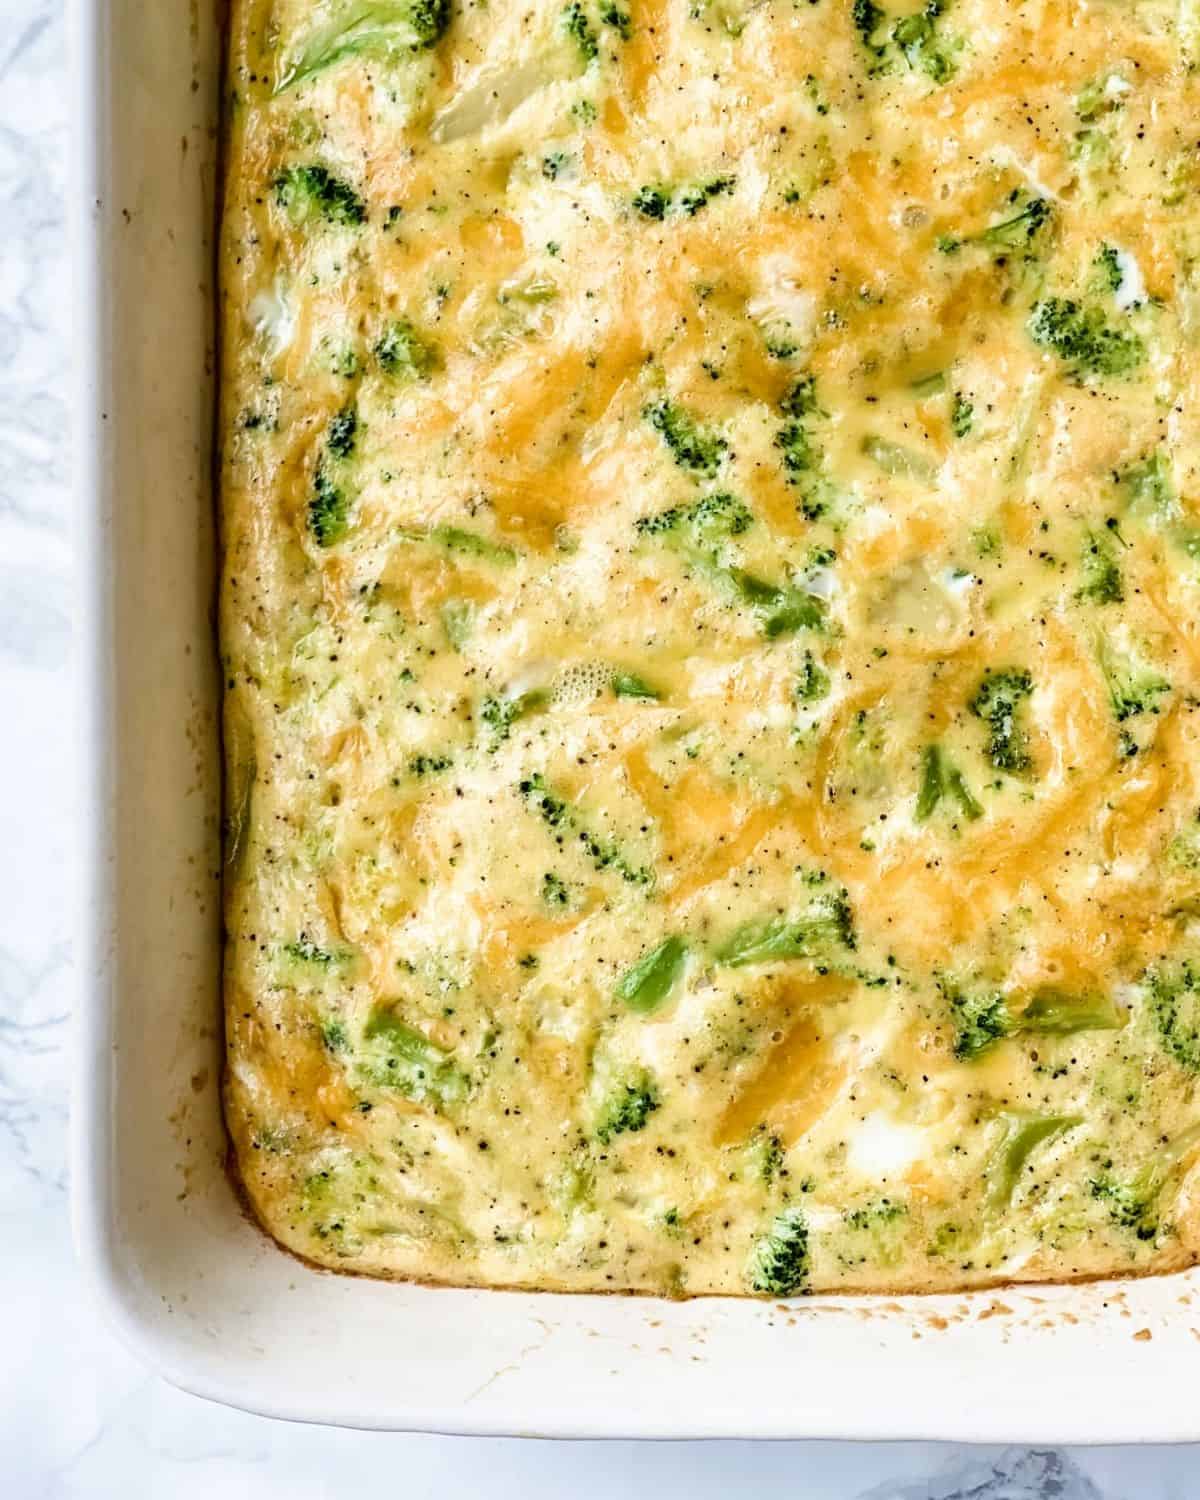 cheese and broccoli egg bake cooked in a casserole dish